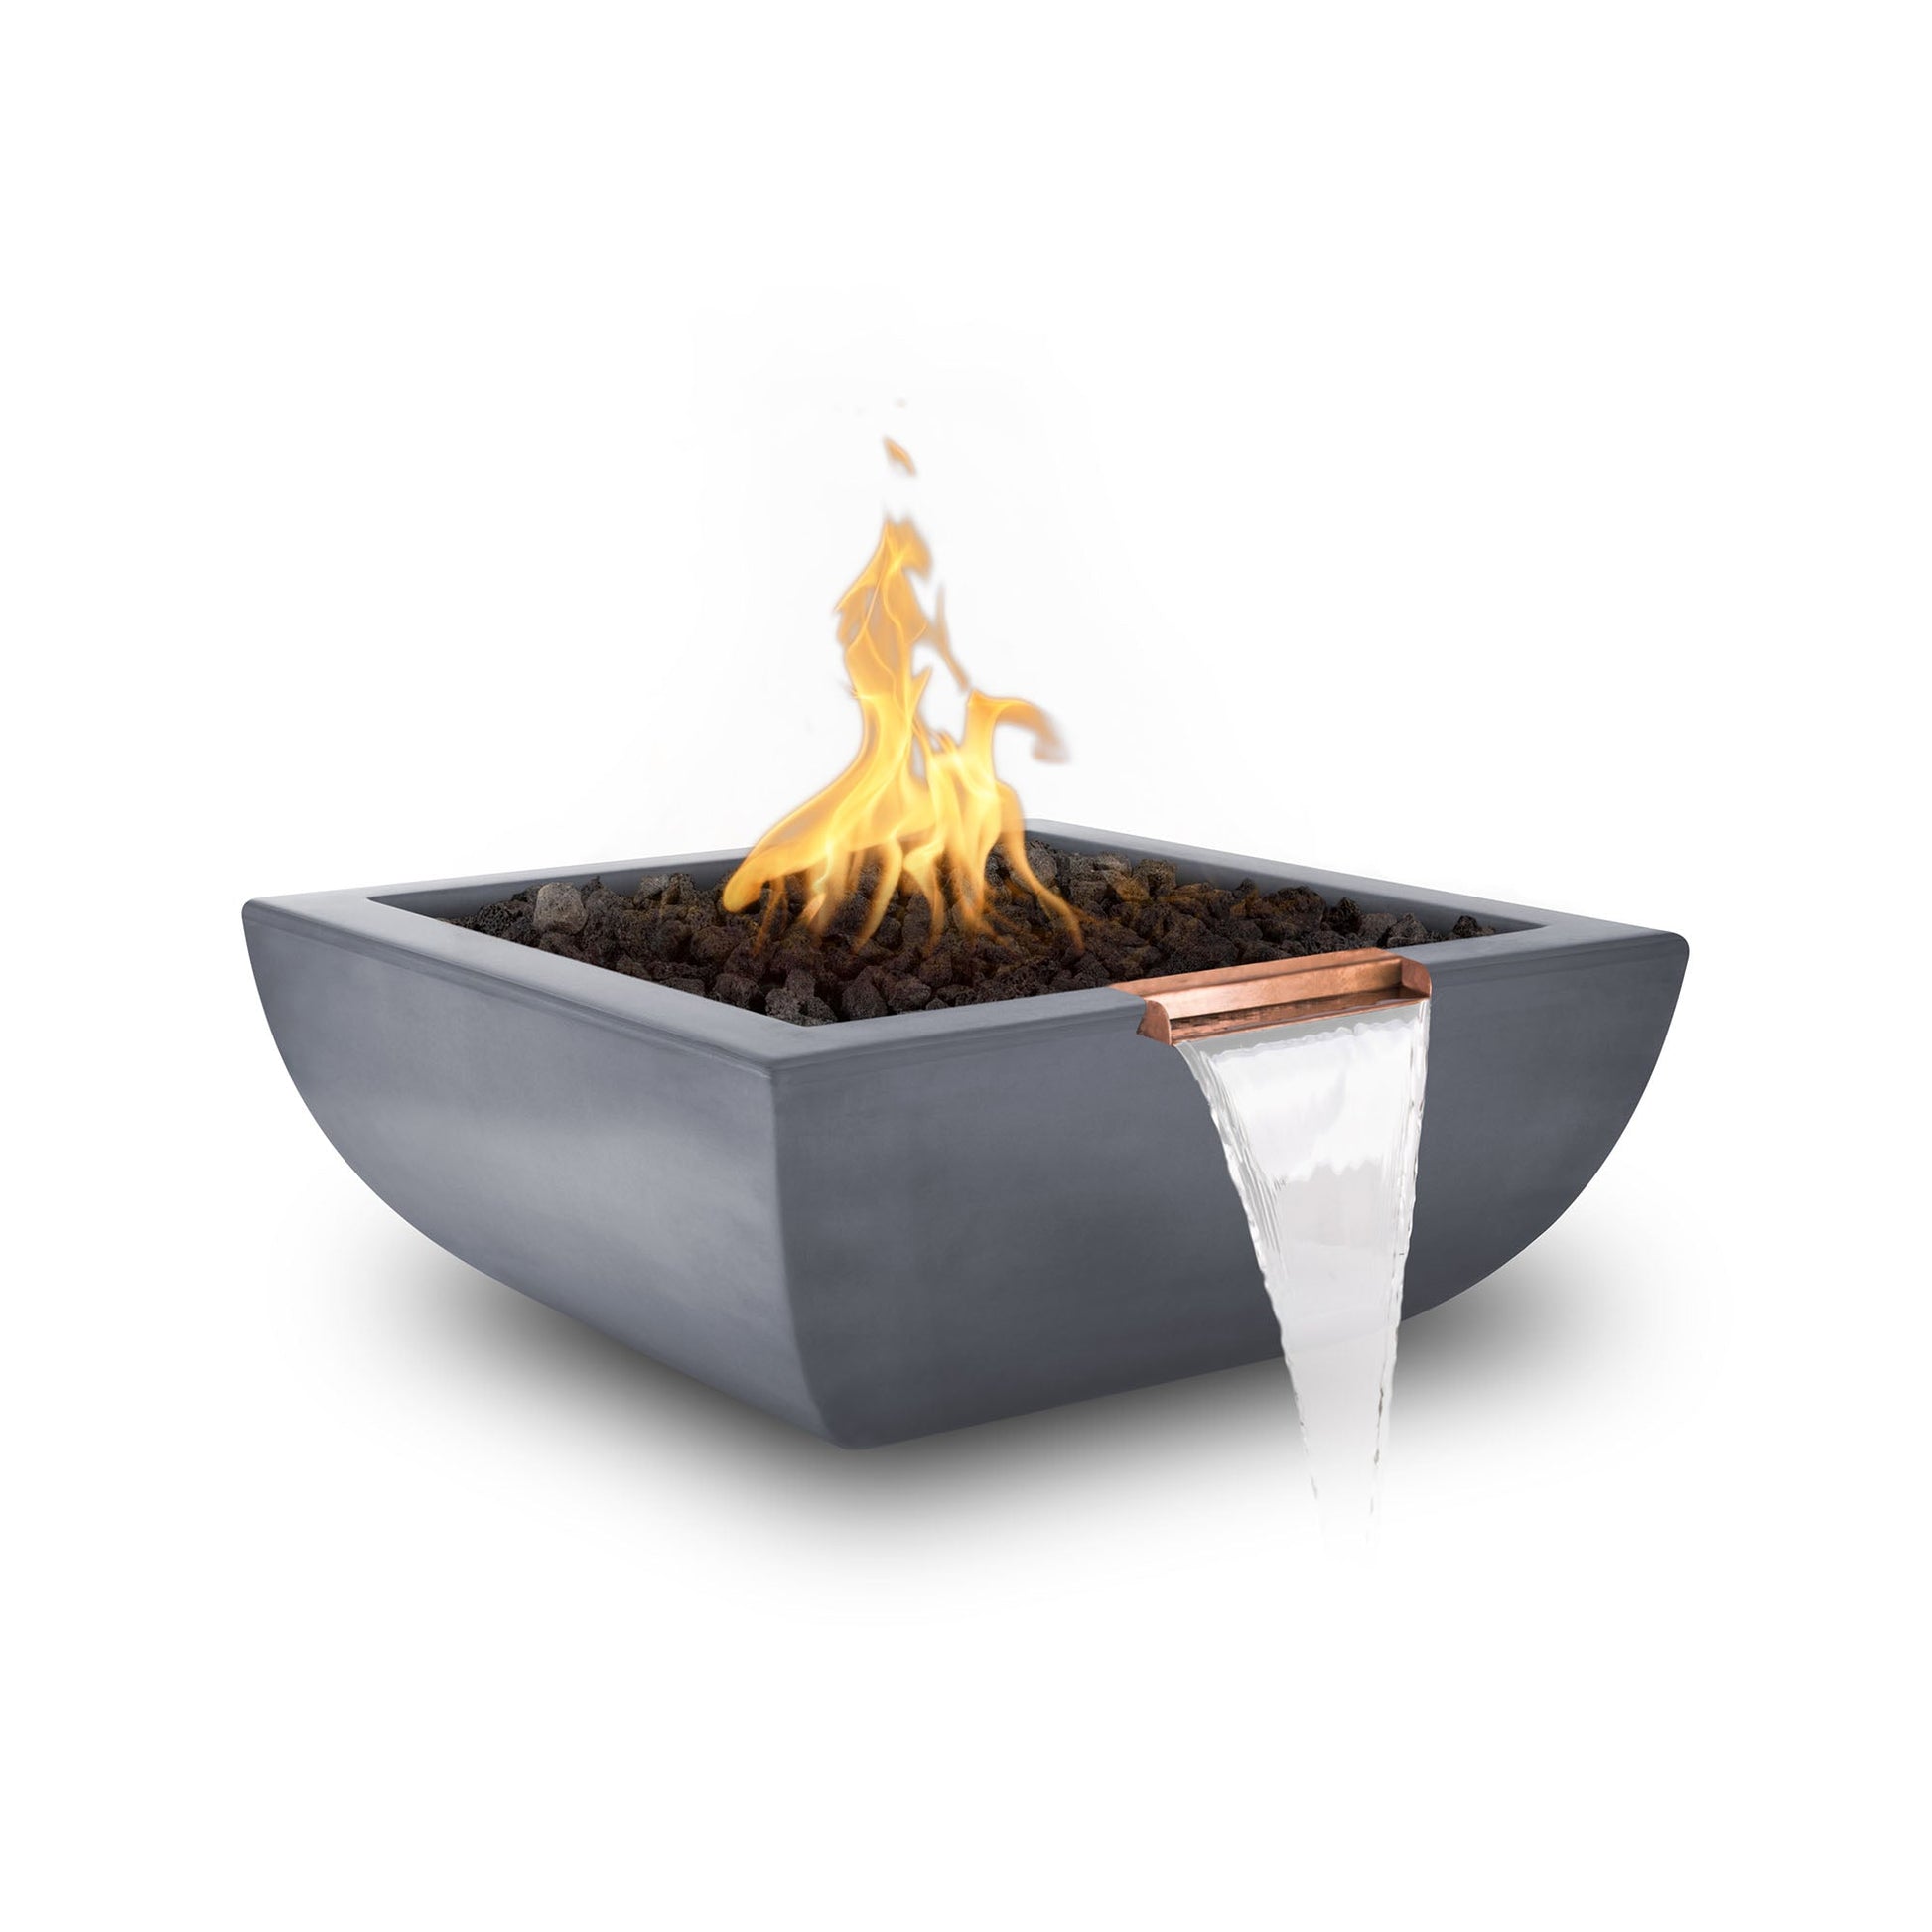 The Outdoor Plus Square Avalon 24" Brown GFRC Concrete Natural Gas Fire & Water Bowl with Match Lit with Flame Sense Ignition